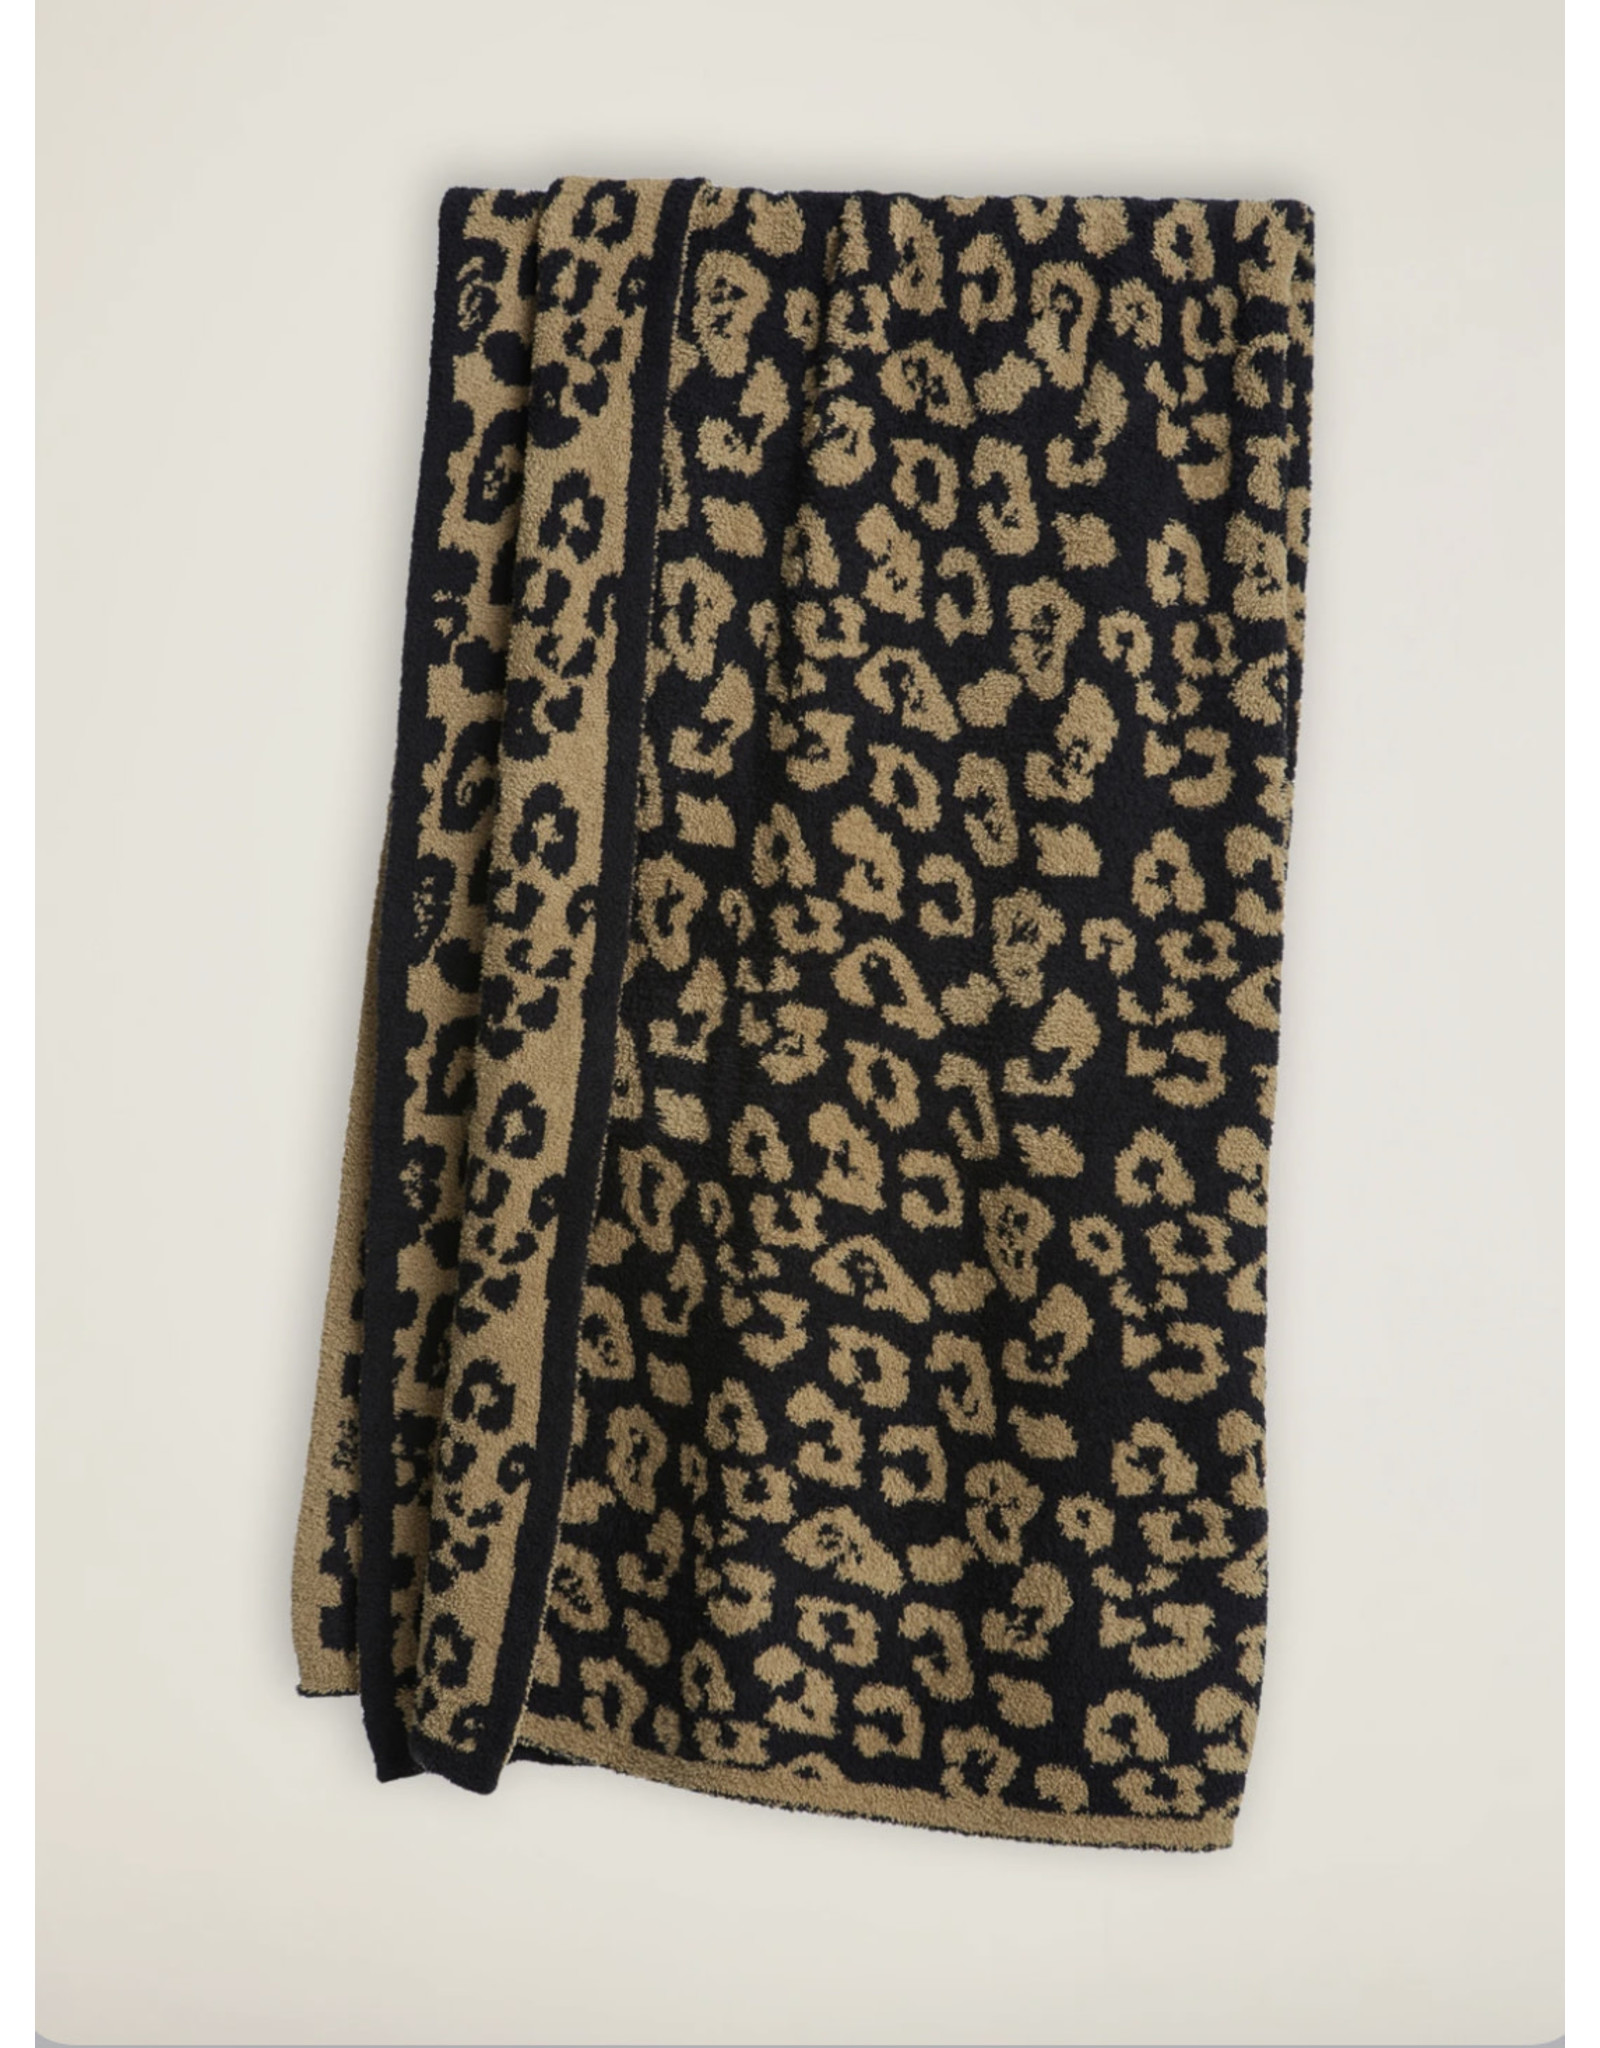 Barefoot Dreams CozyChic® Barefoot in the Wild® Throw in Camel Black